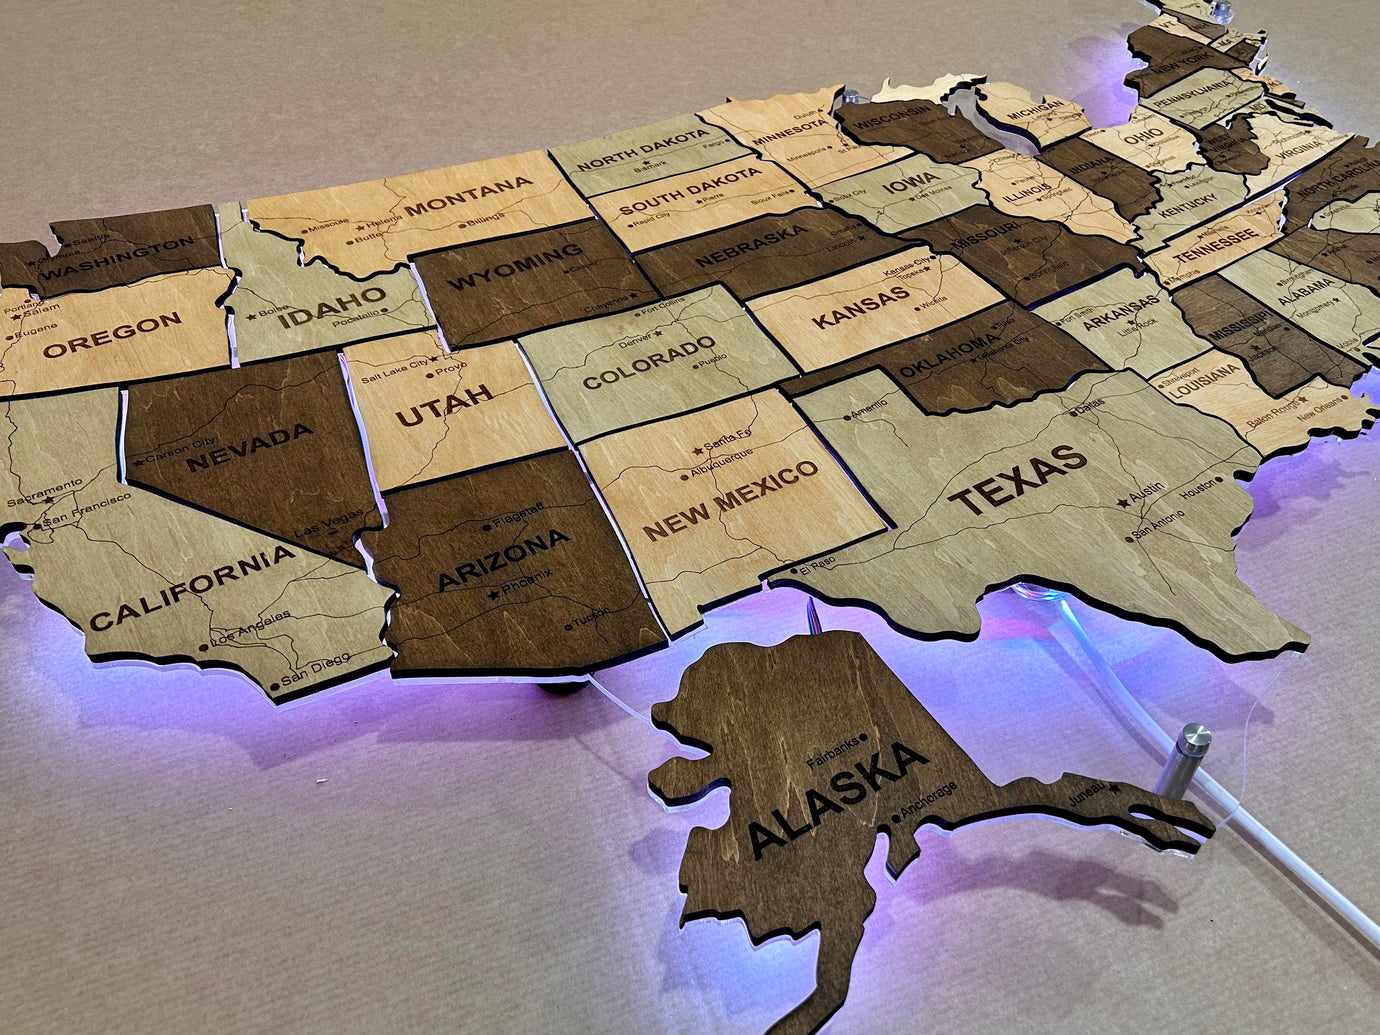 The USA LED RGB map on acrylic glass with roads and backlighting between states color Memphis